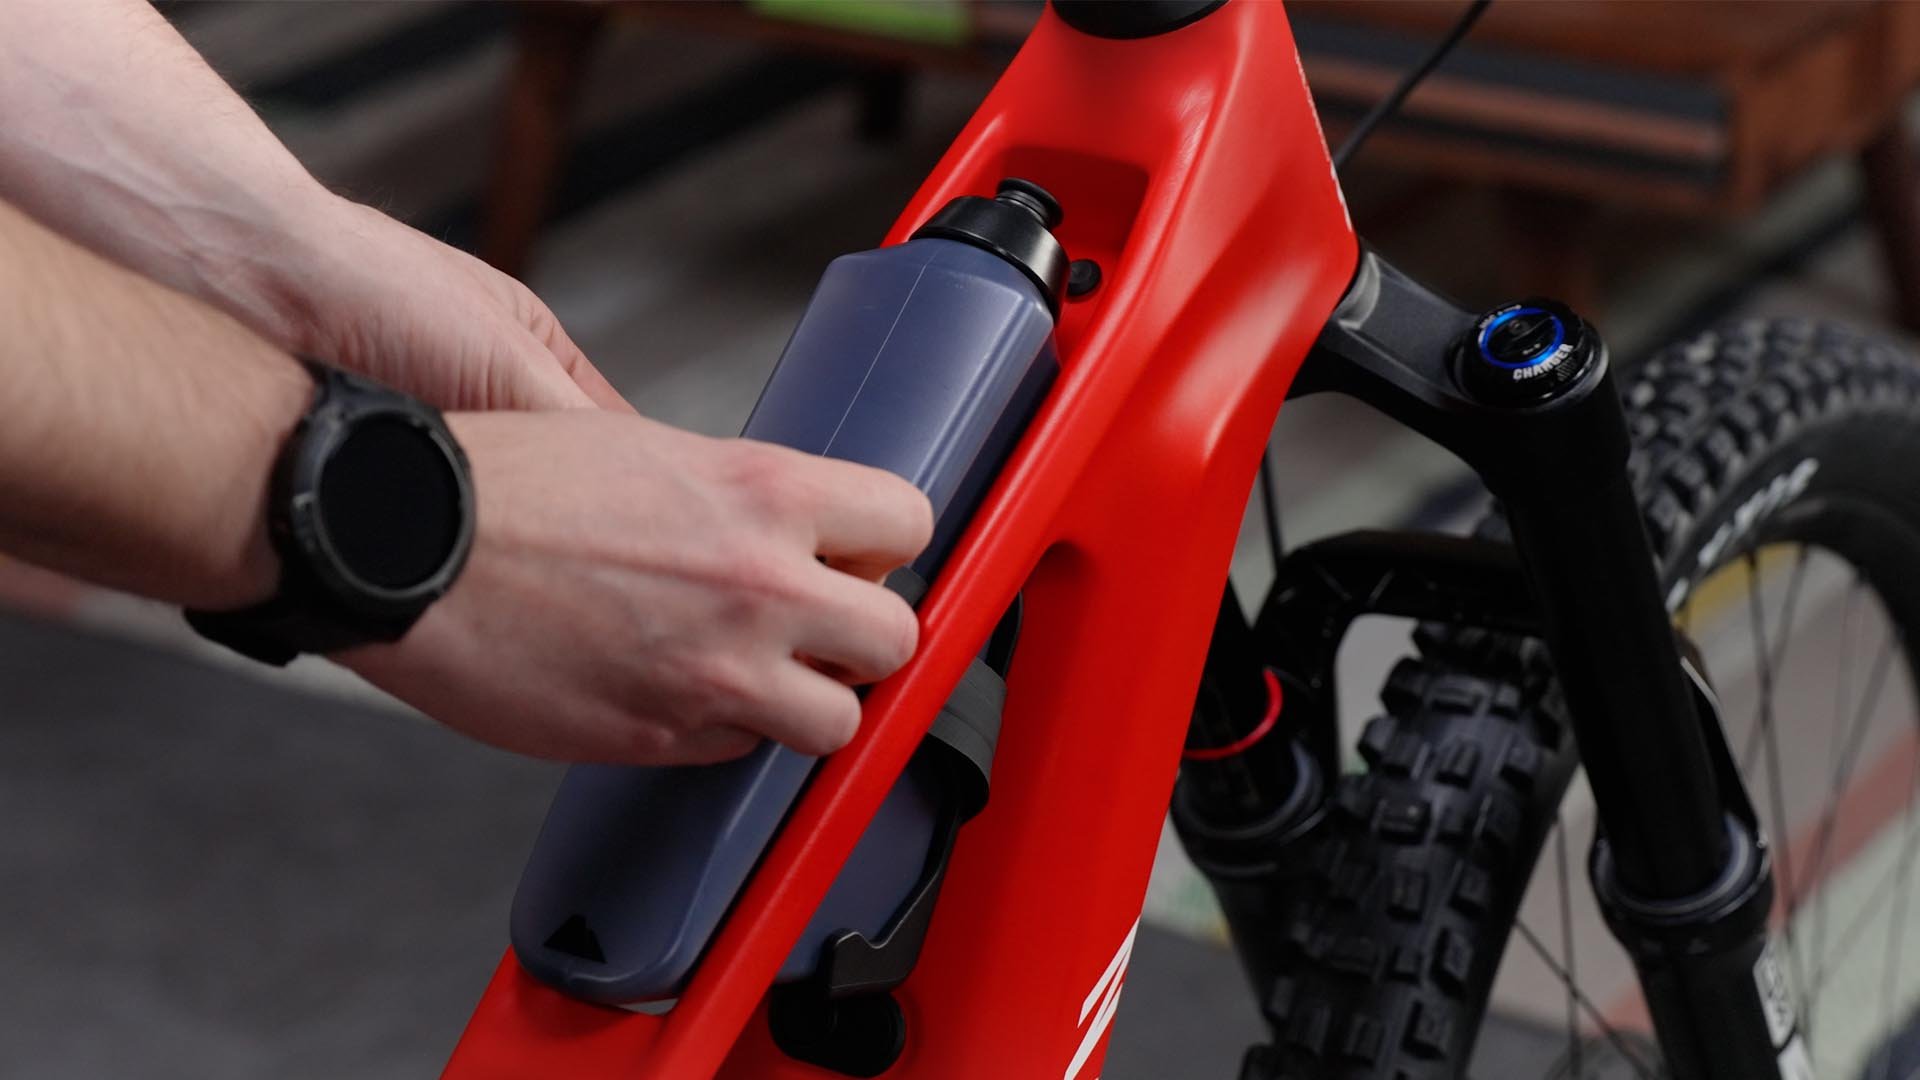 Fit the bottle cage to your Torque:ON